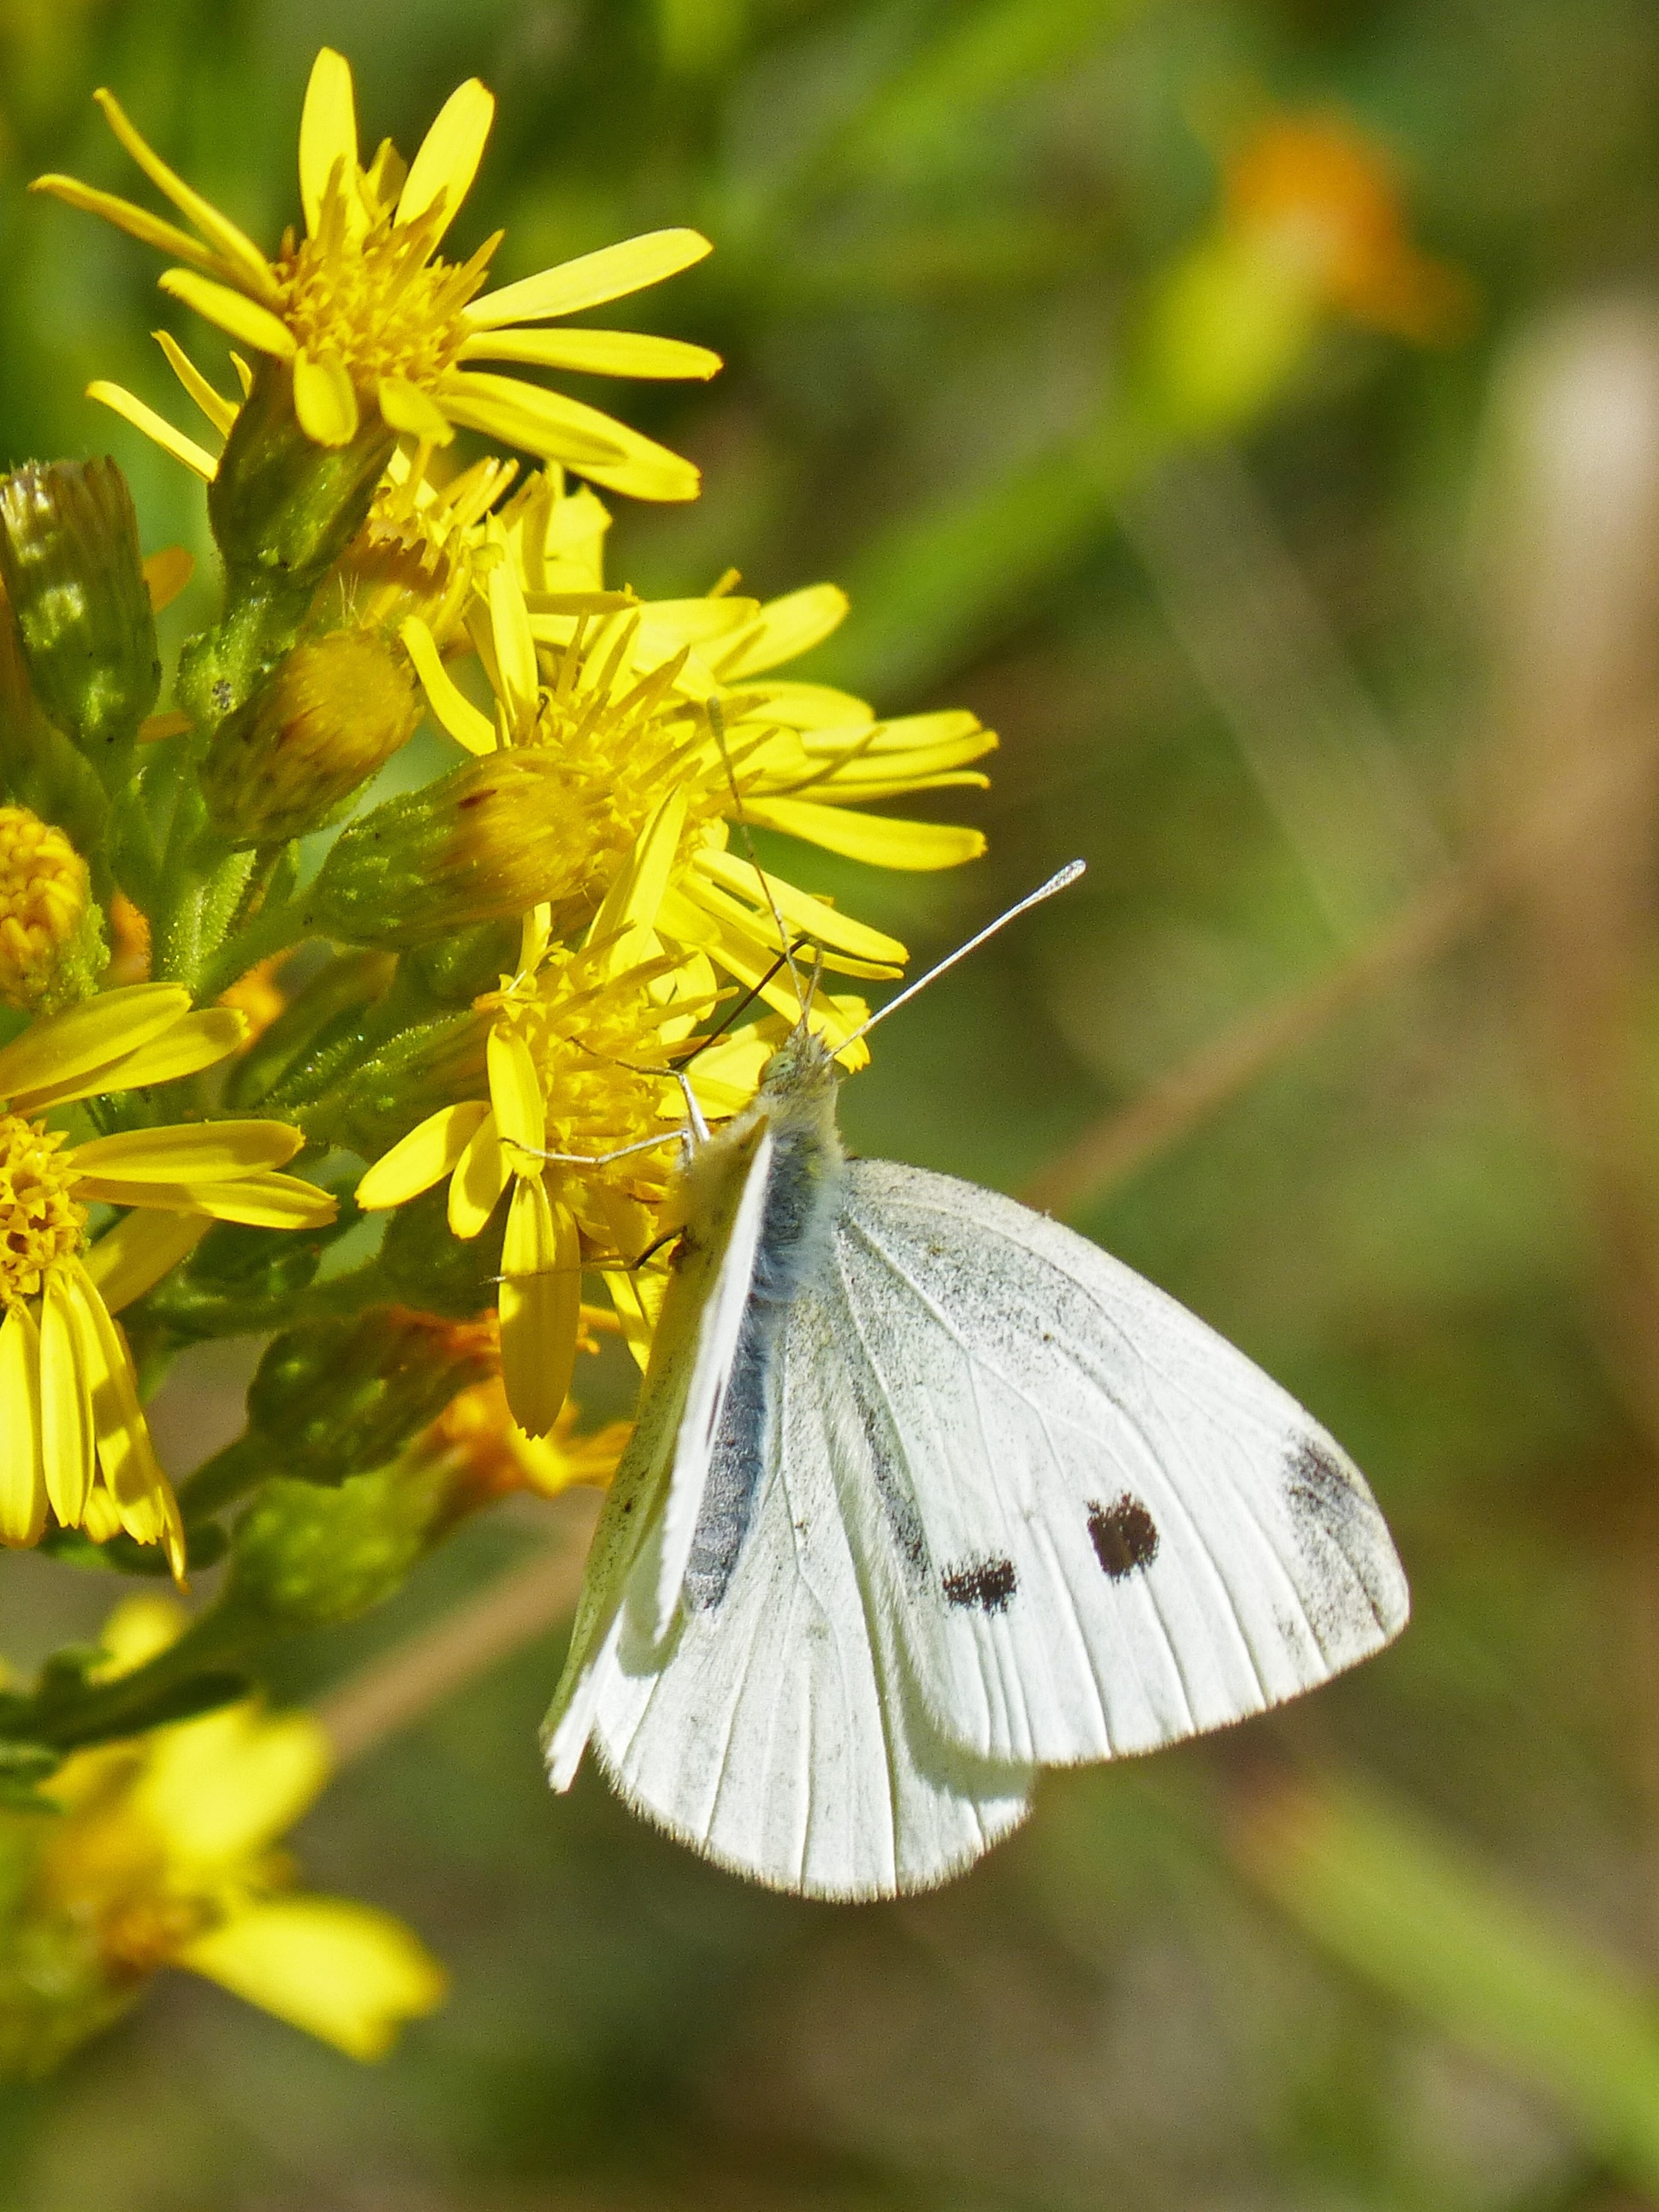 white and gray butterfly on yellow petaled flower